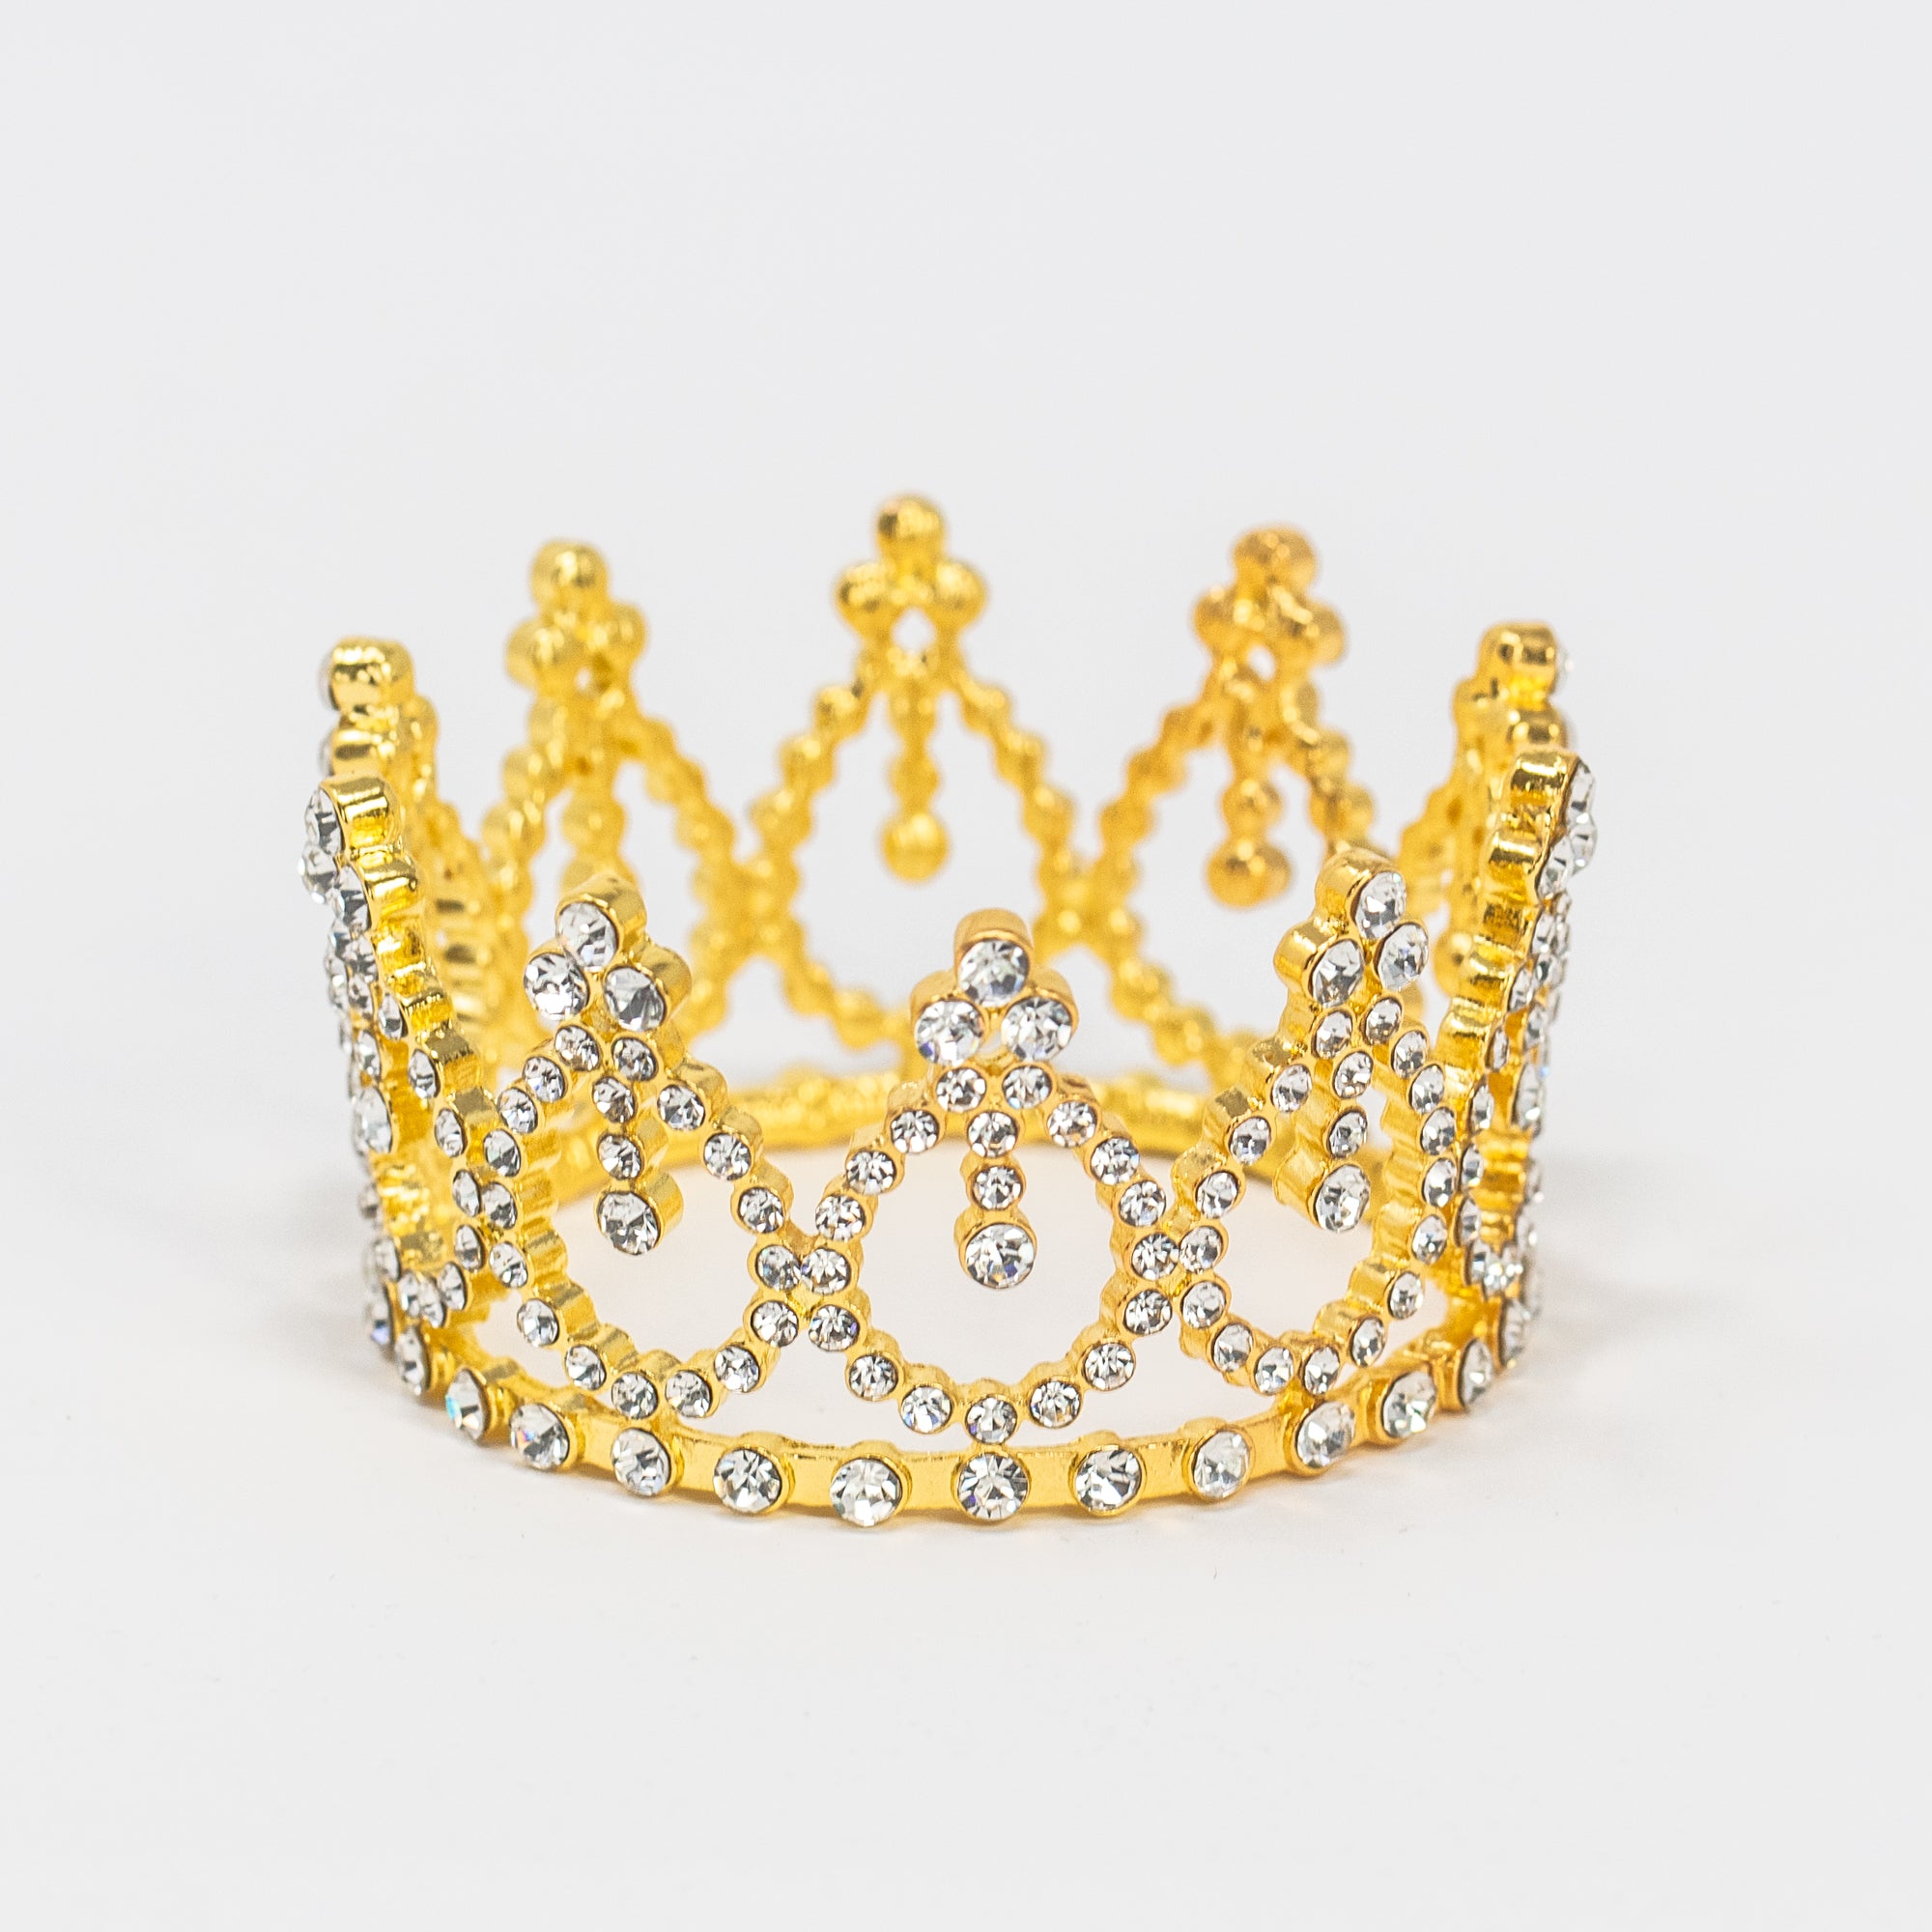 Mini Gold Paper Crowns, 4 Count